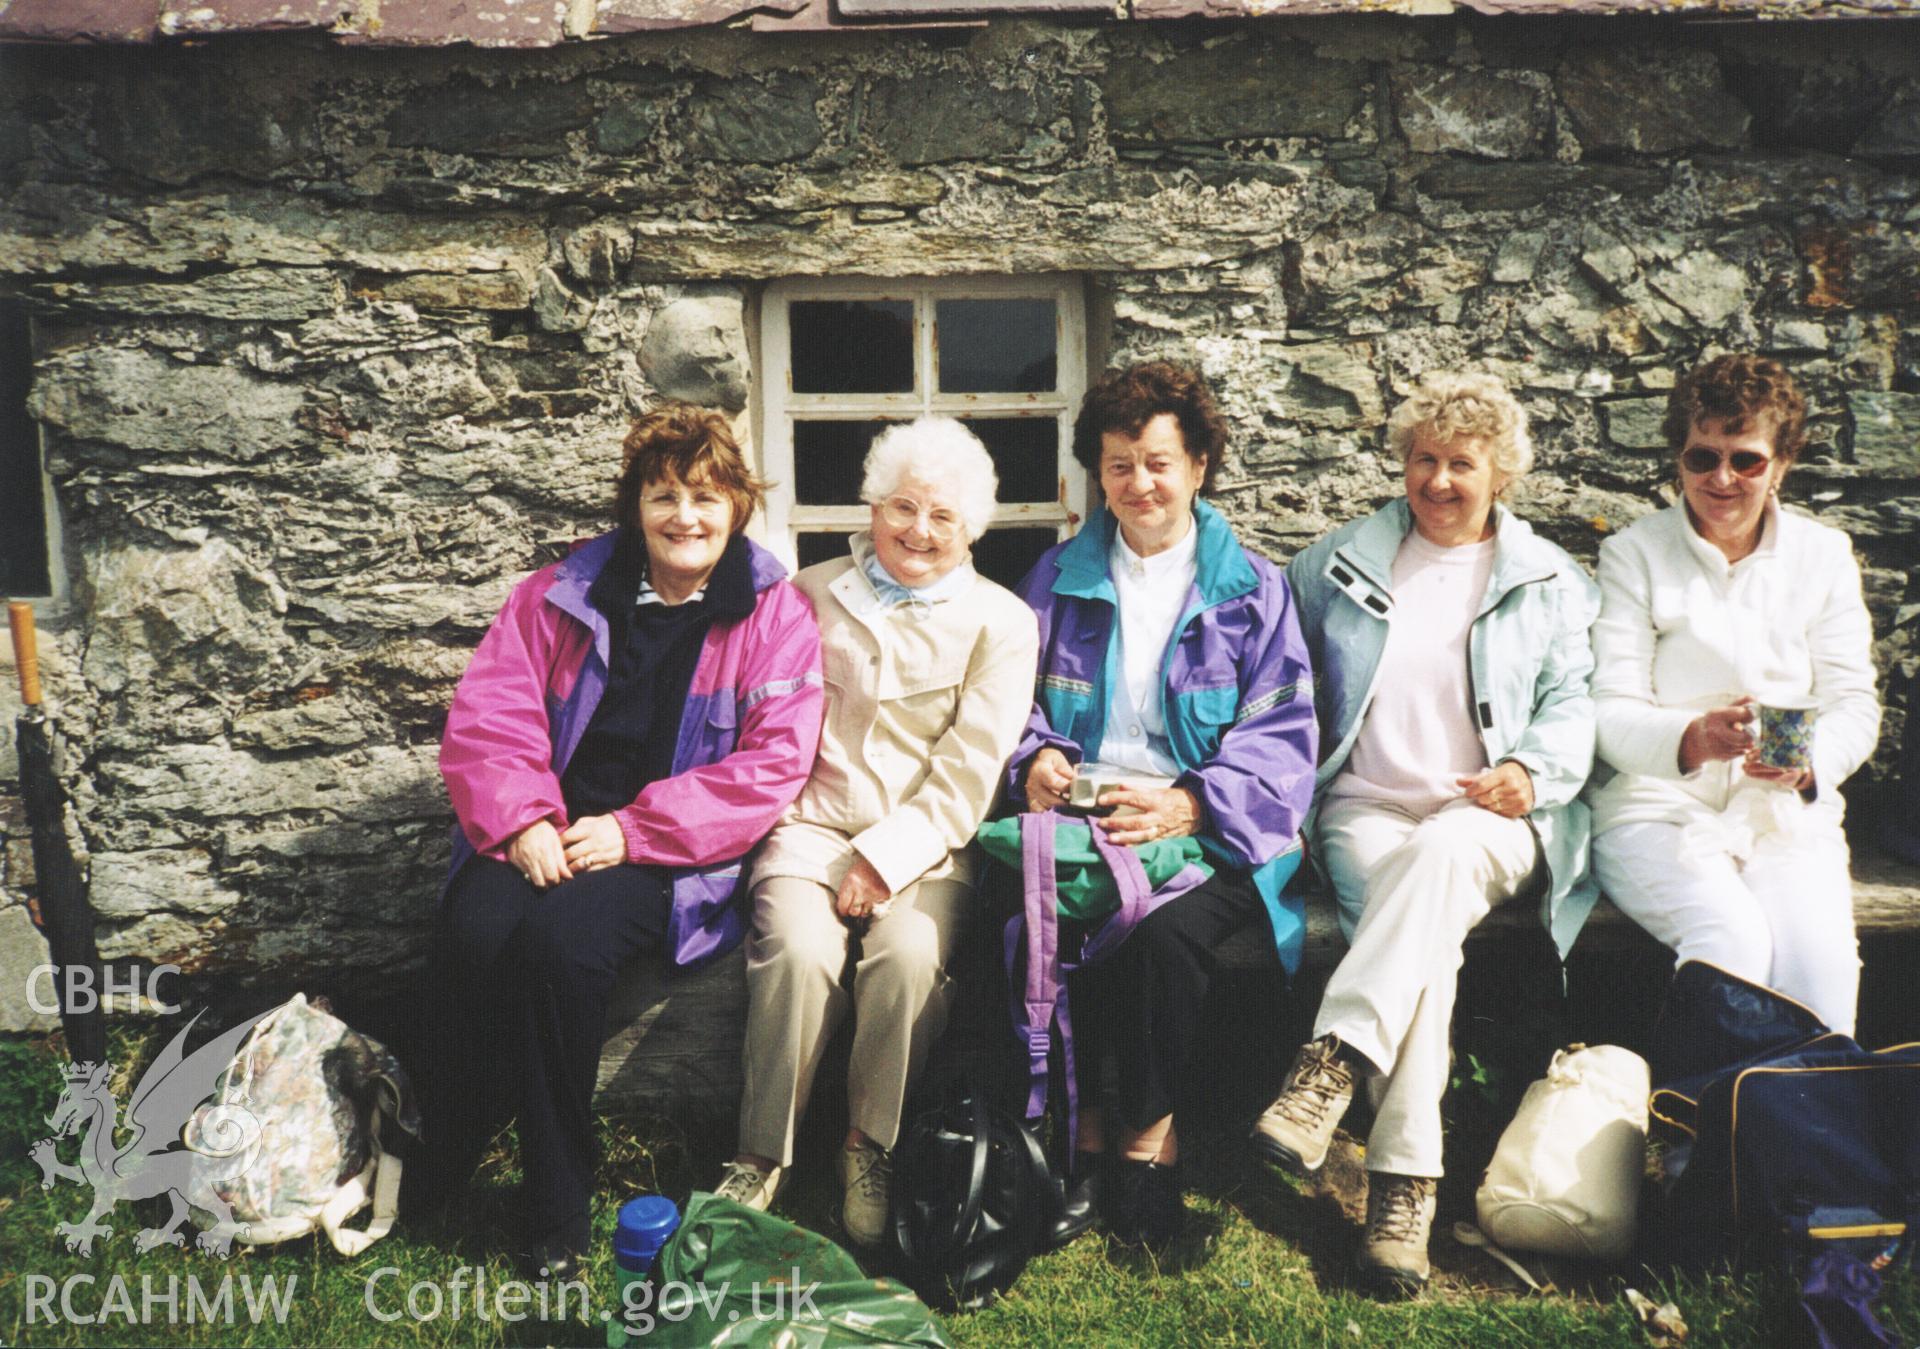 Colour photograph taken during the outing to Ynys Enlli of the Sunday school in summer, late 1980s. Donated as part of the Digital Dissent Project.